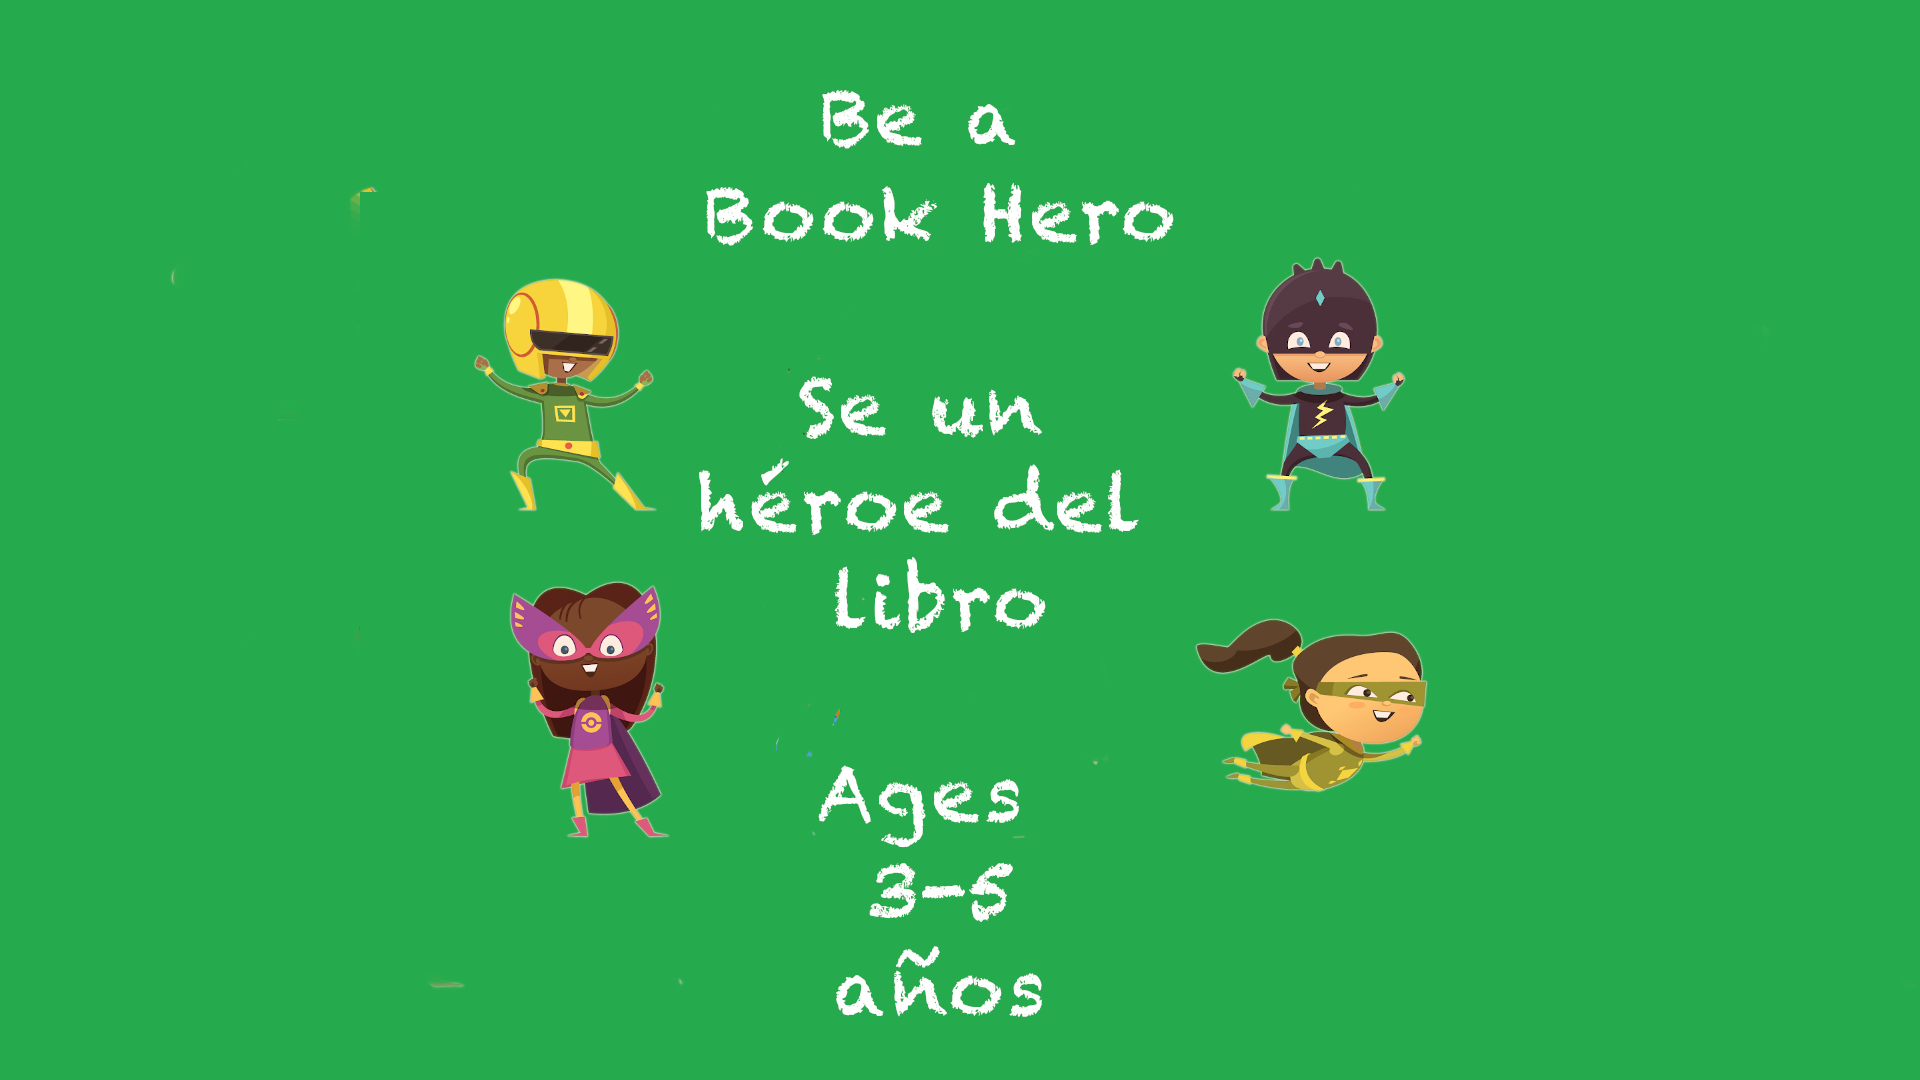 Be a Book Hero for 3-5 year olds